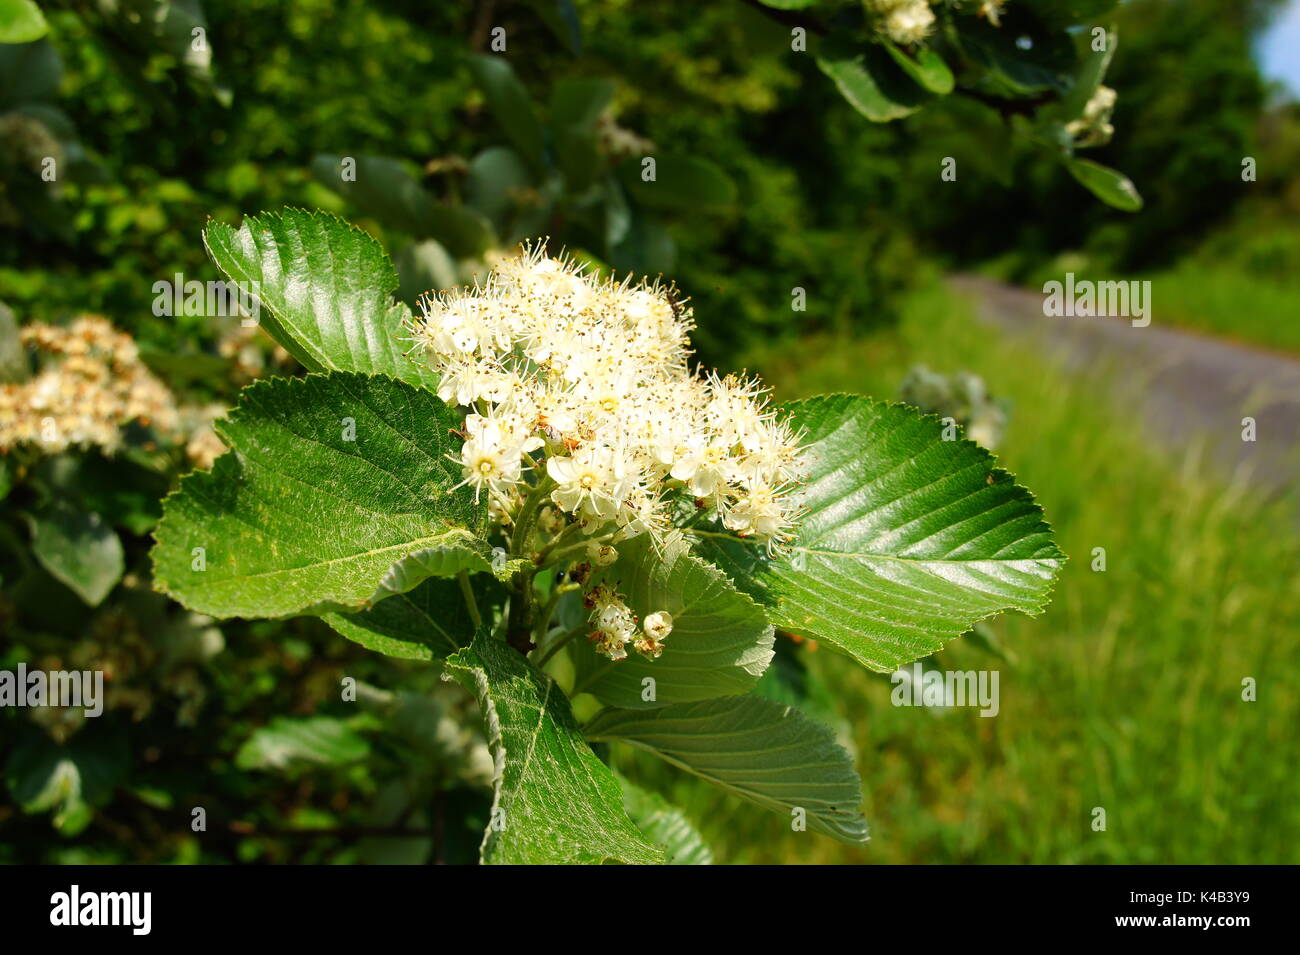 White Blooms Of The Sorbus Flowers With Green Leaves Stock Photo